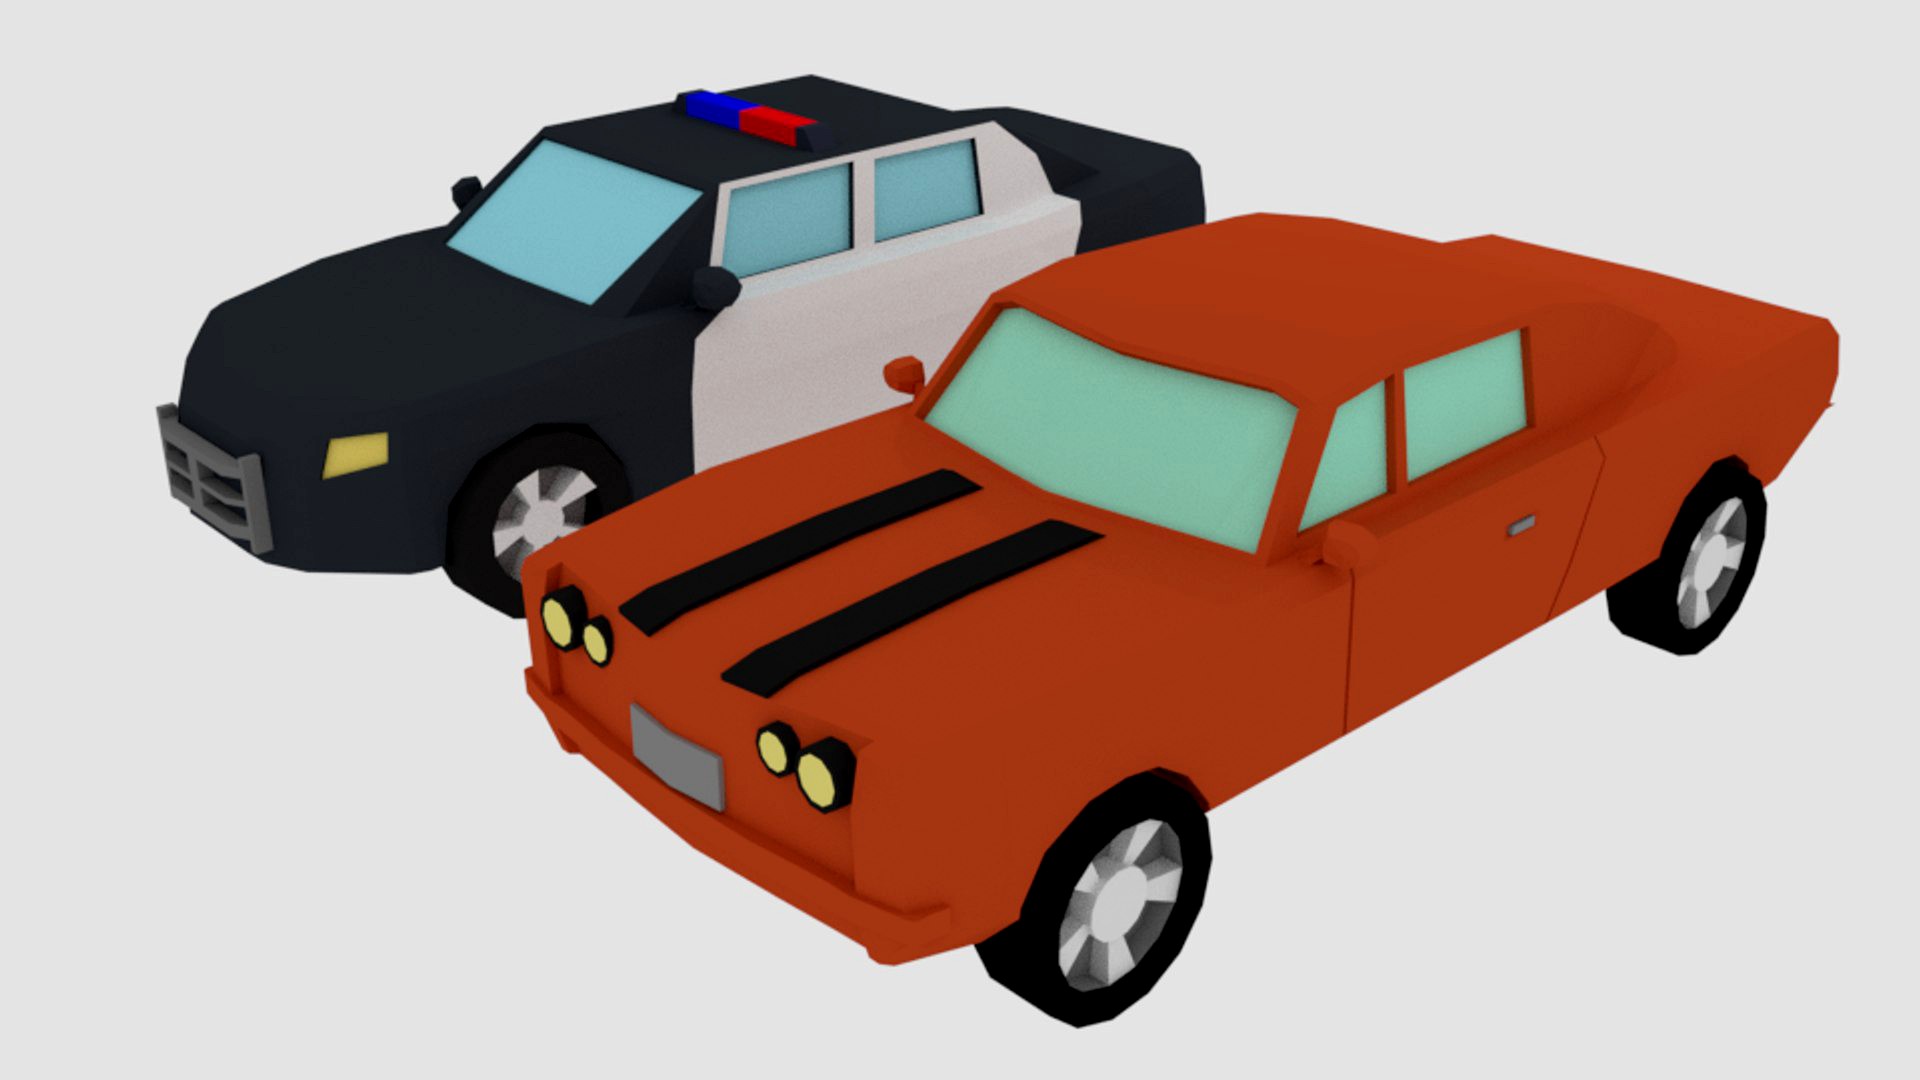 LowPoly Cars (Muscle car and Police car)